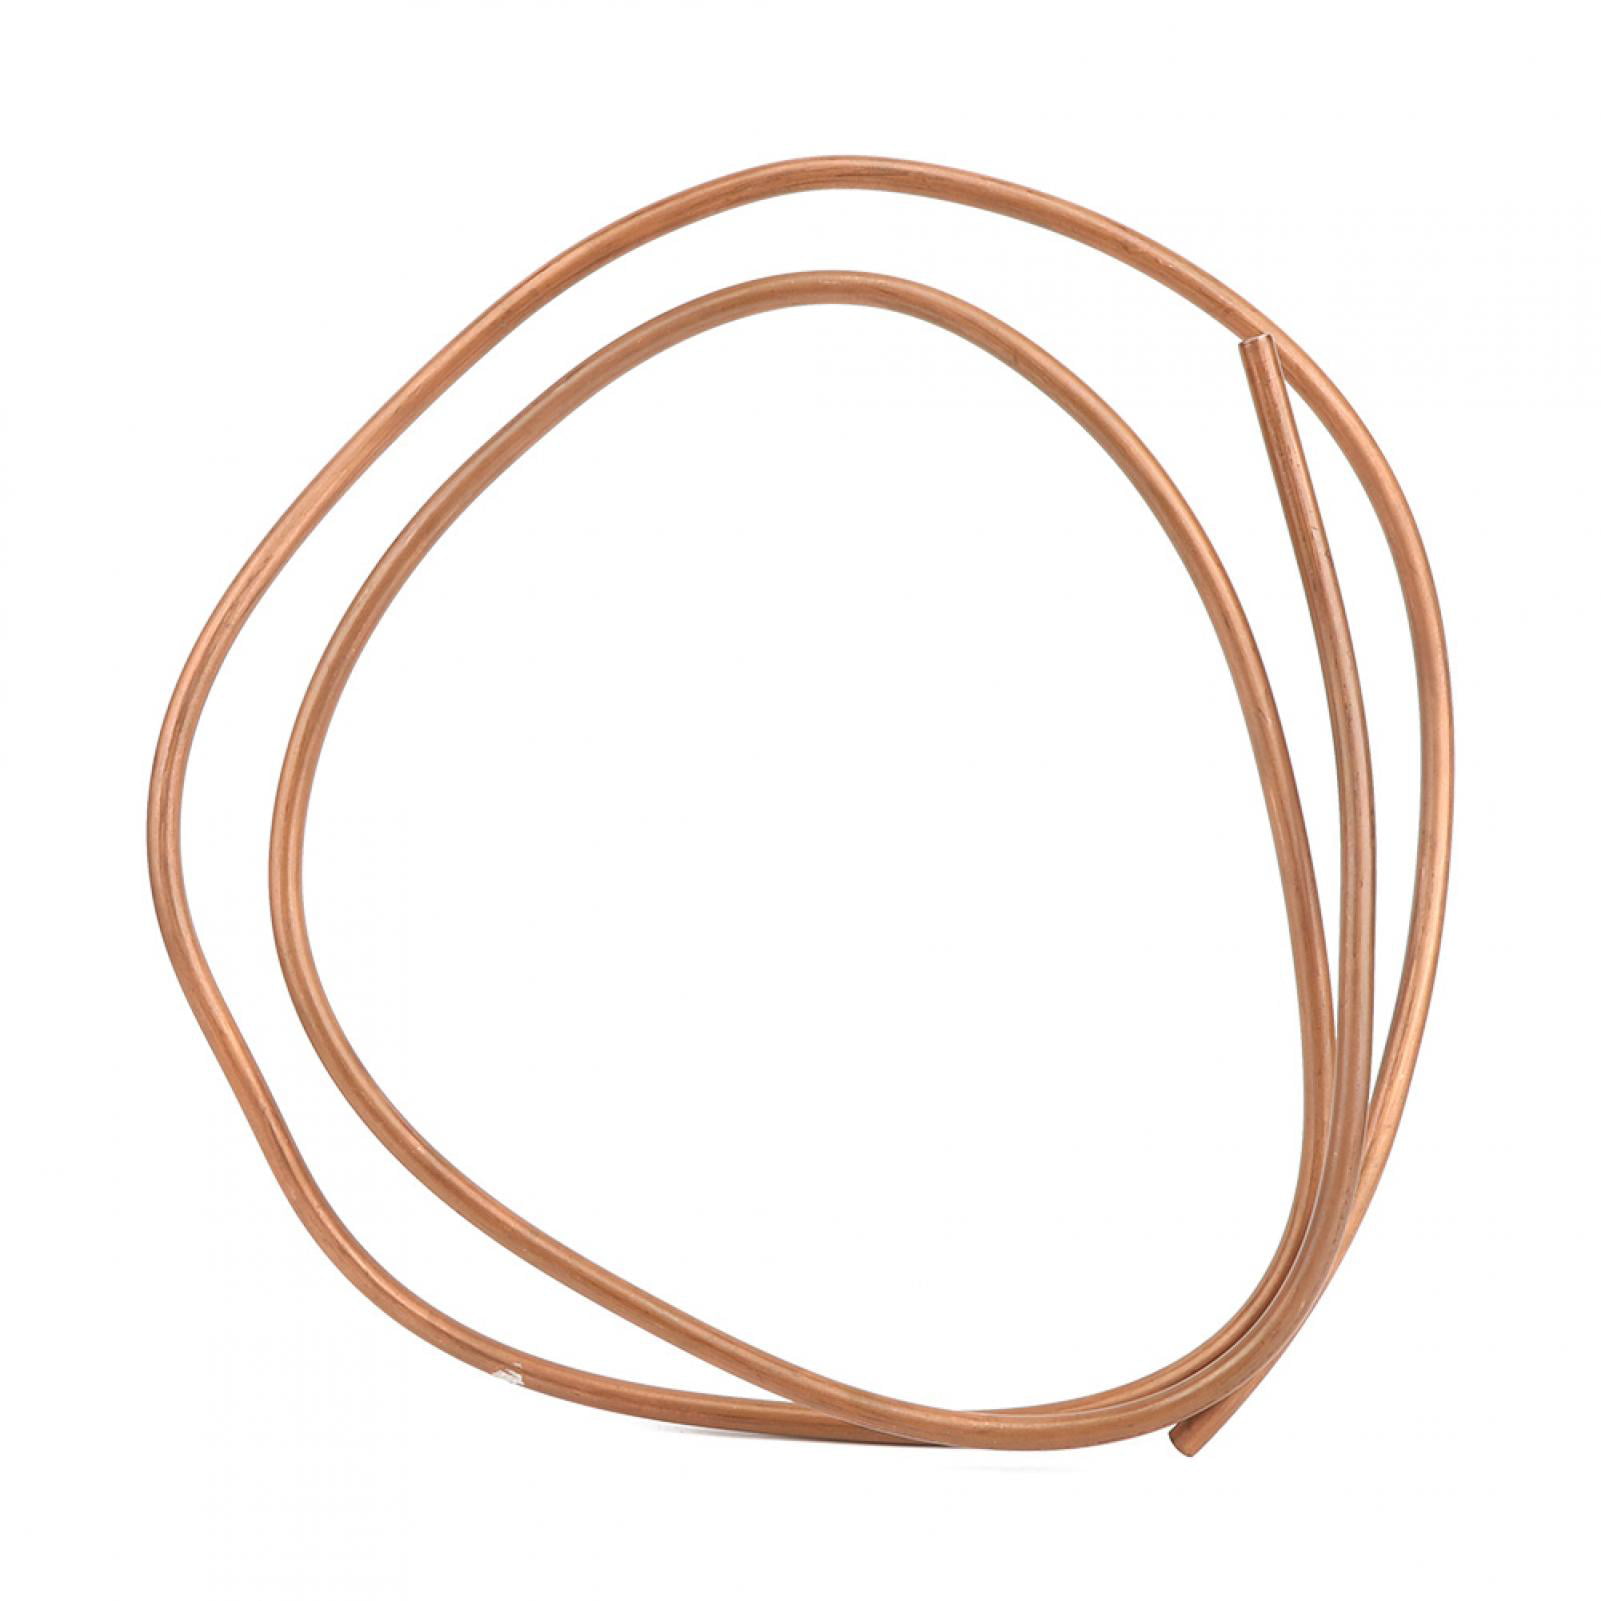 Soft Microbore Copper Tube Pipe OD 4mm x ID 3mm For Refrigeration Plumbing 